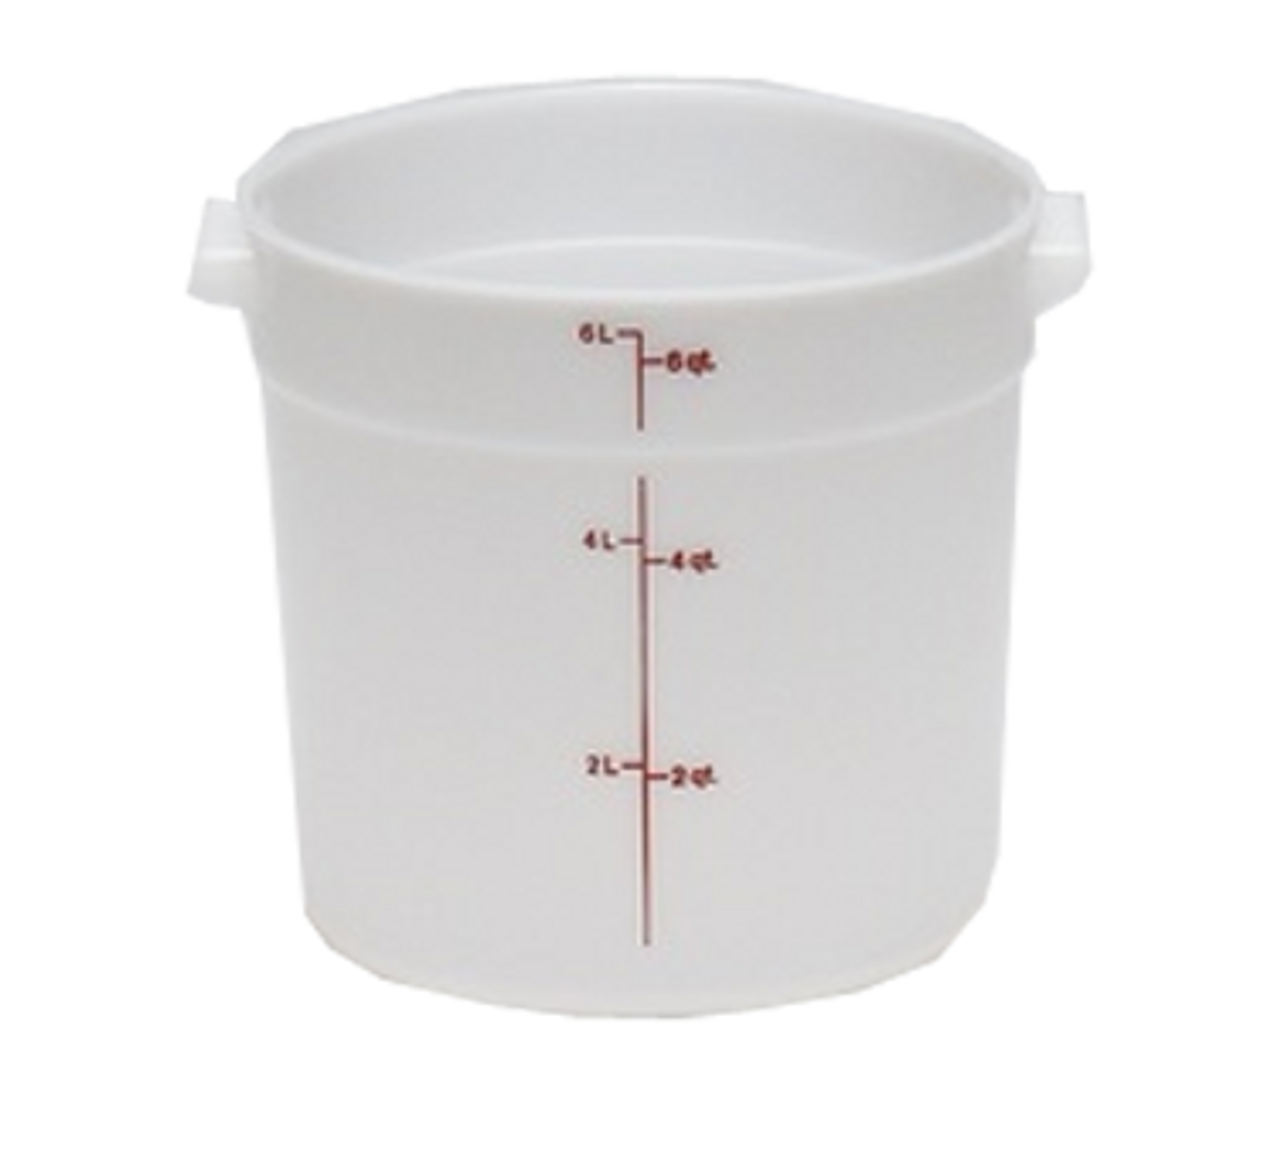 https://cdn11.bigcommerce.com/s-g3i86bef61/images/stencil/1280x1280/products/2563/3003/Cambro-RFS6148-Storage-Container-Round__36390.1665427464.png?c=1